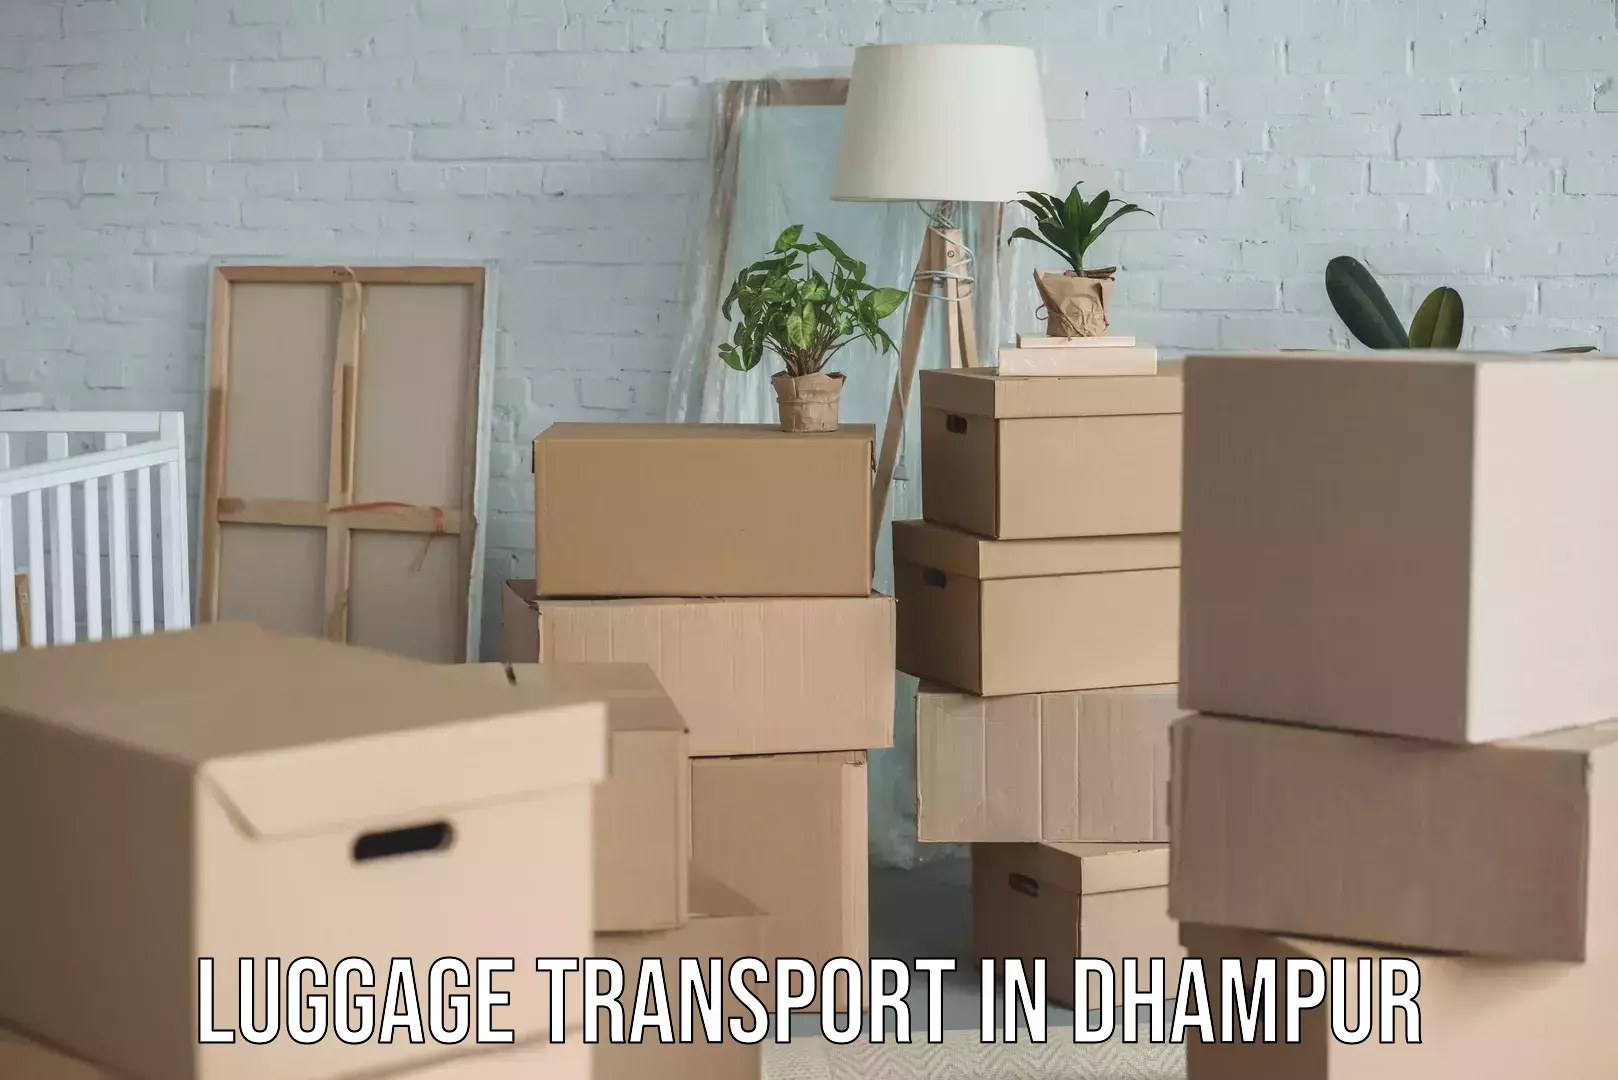 Luggage transport rates in Dhampur